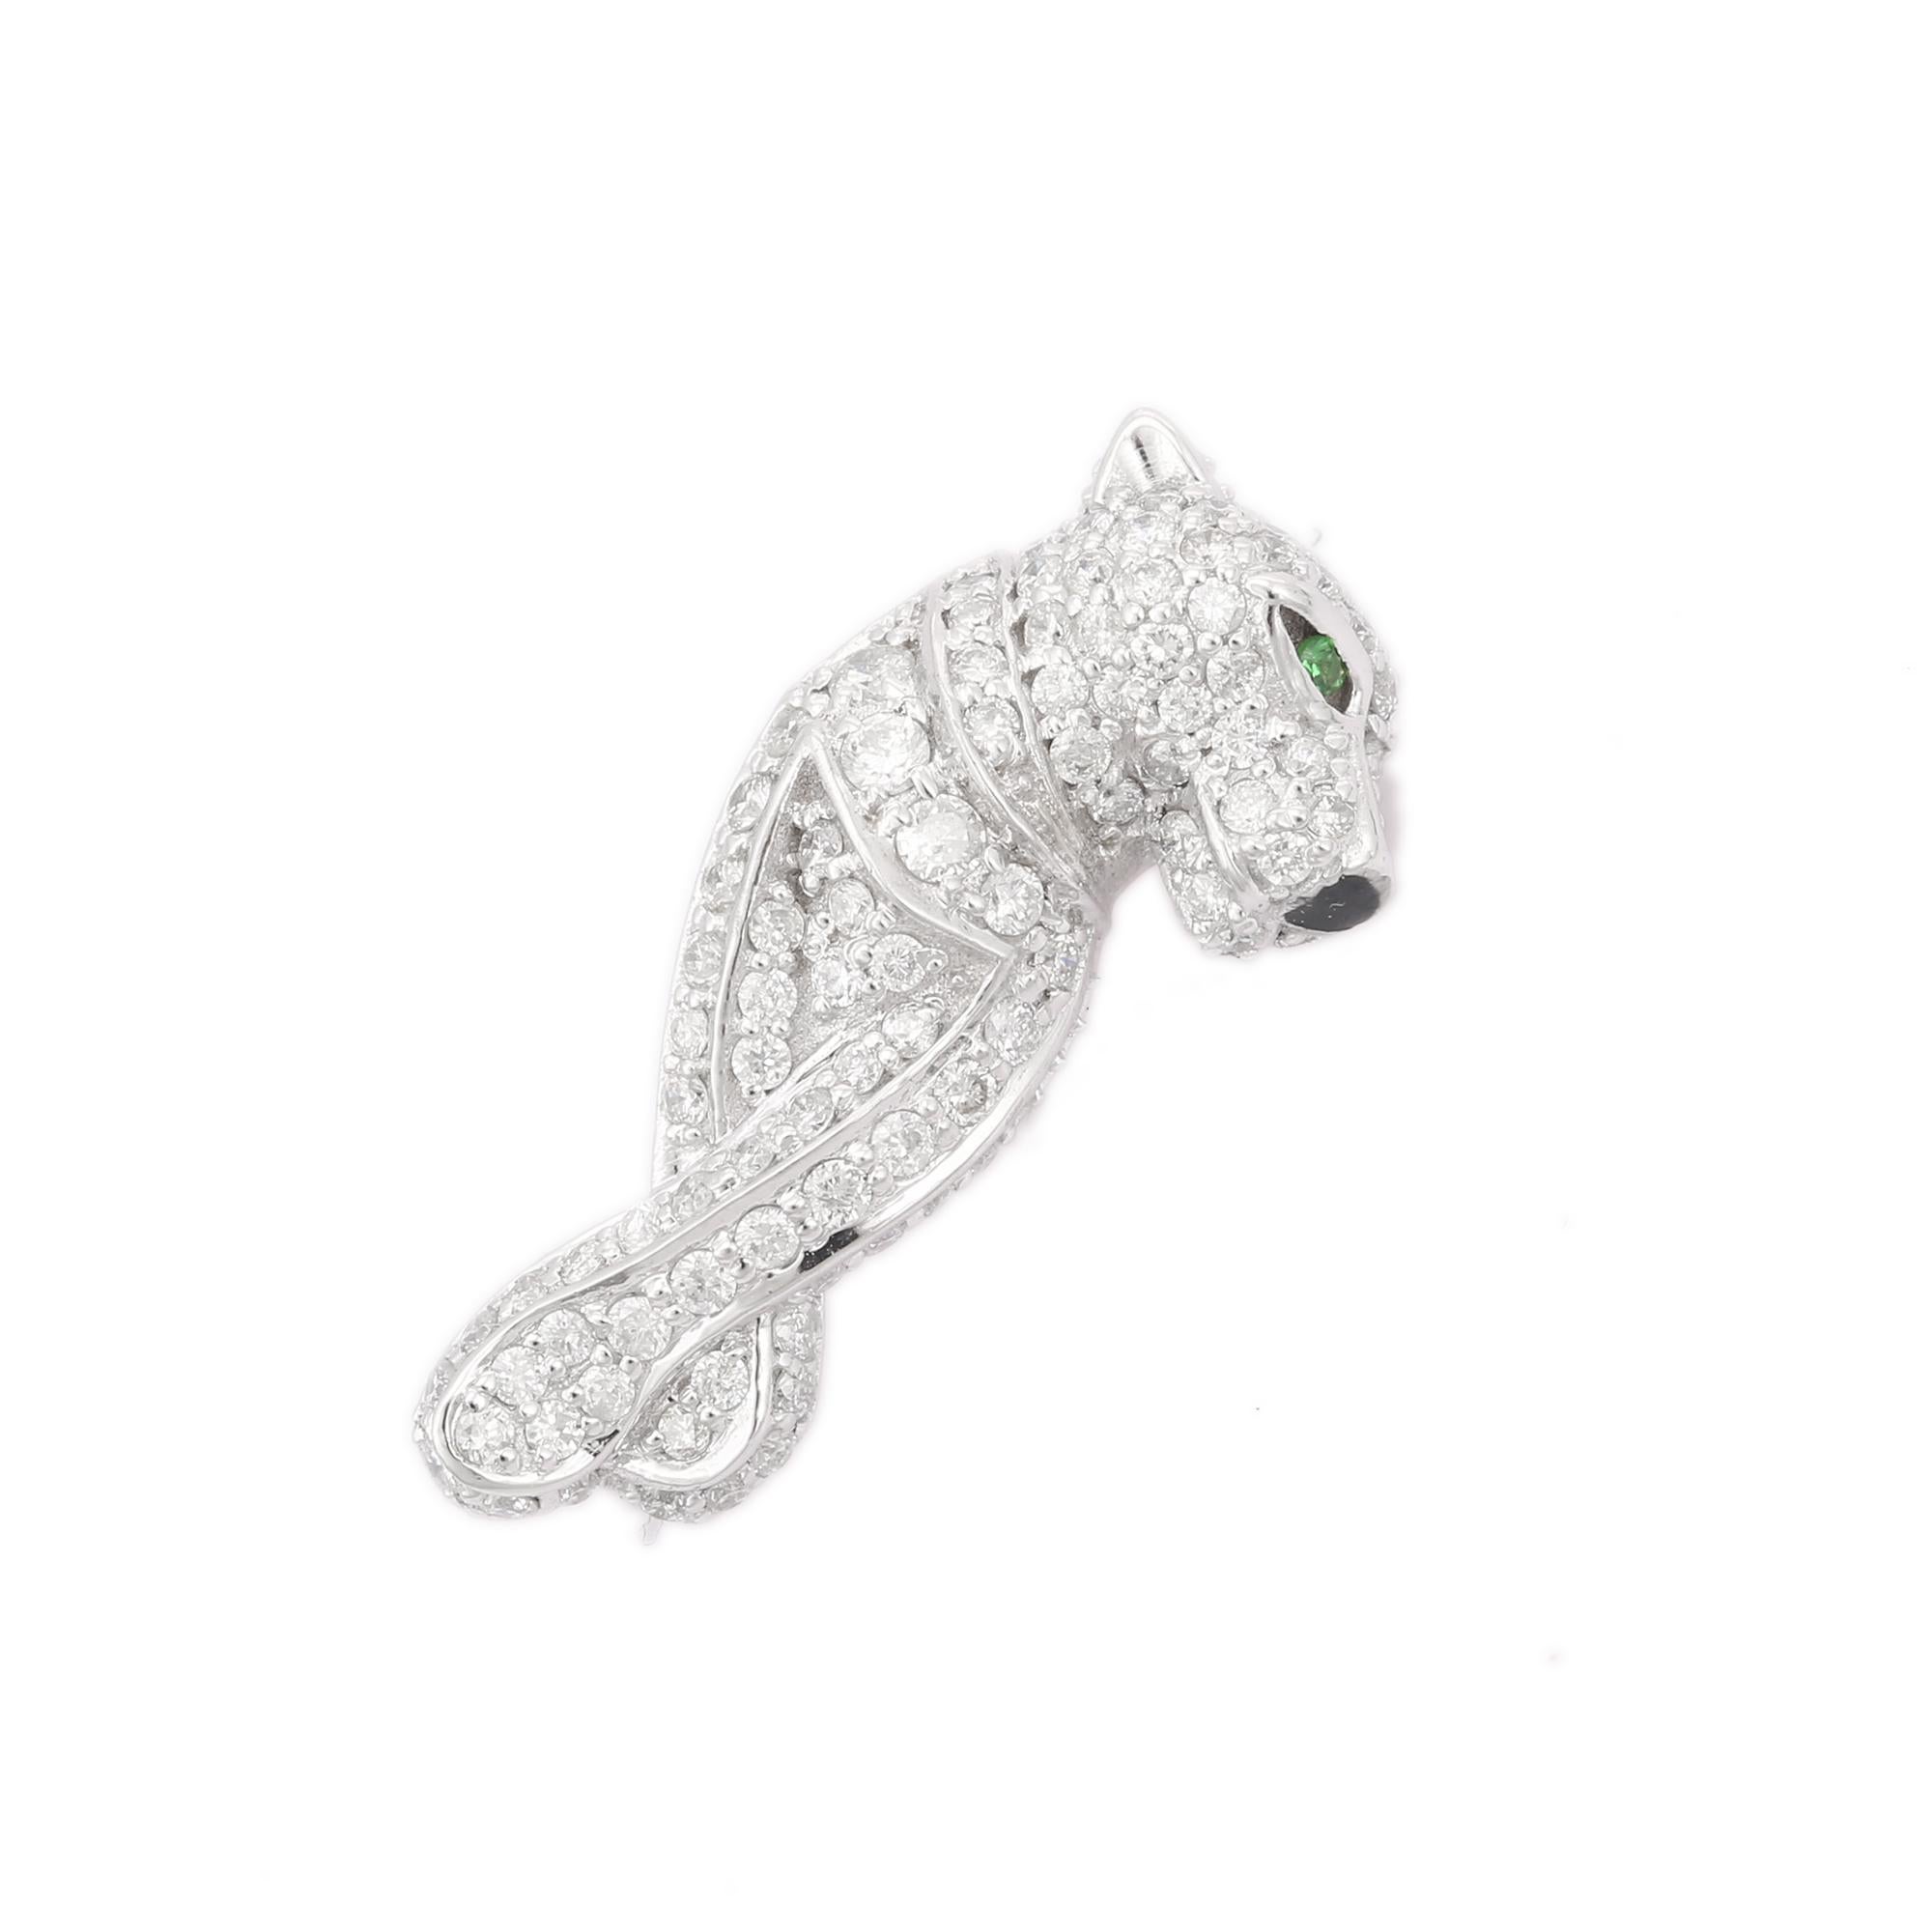 Round Cut Panther Tsavorite Diamond Pendant in 18K White Gold For Sale